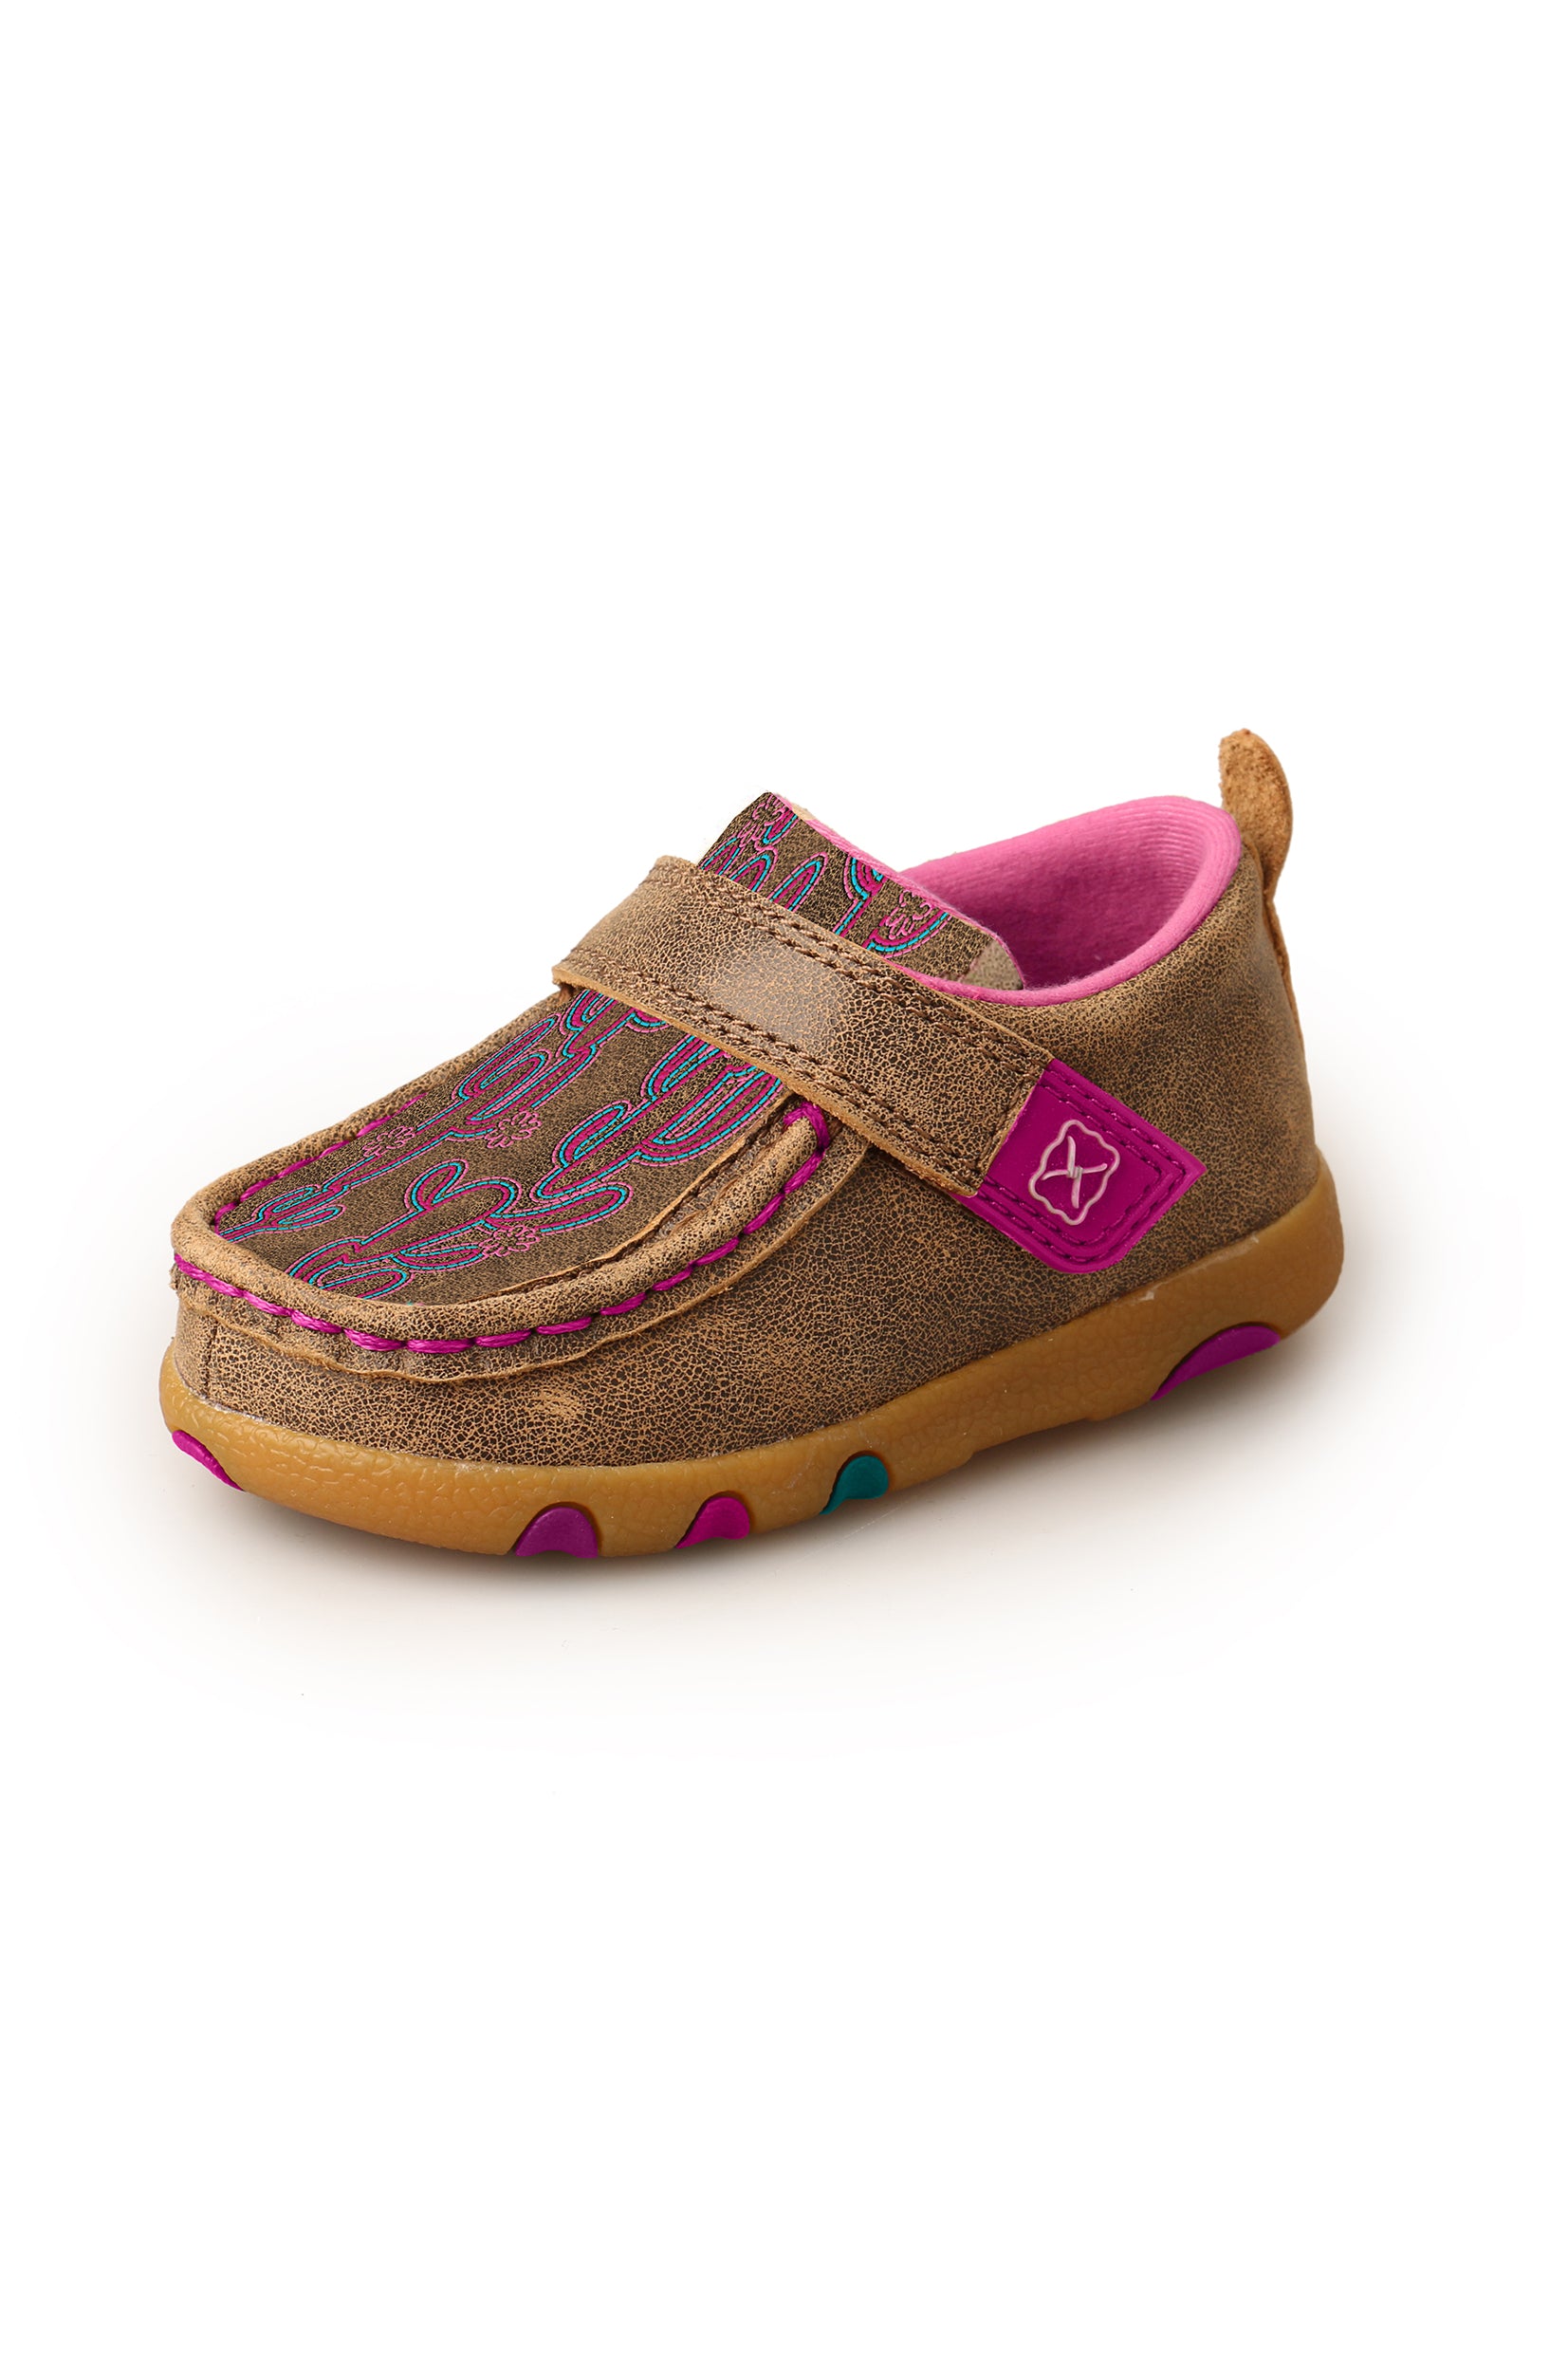 Twisted X Childs Cactus Stitch Casual Mocs